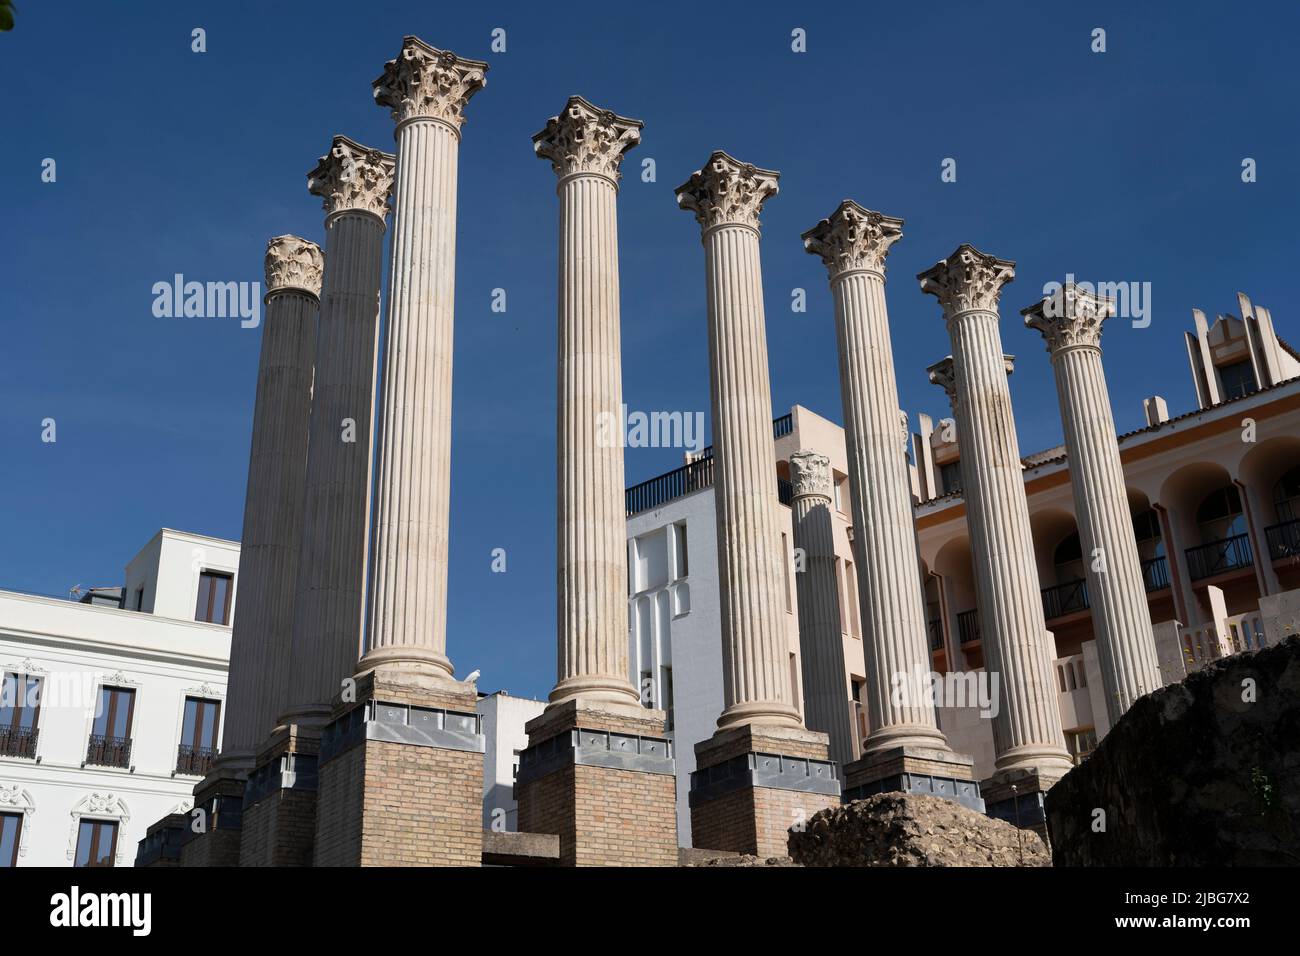 Roman Temple in Cordoba Spain which was discovered in the 1950s during the expansion of City Hall. Stock Photo